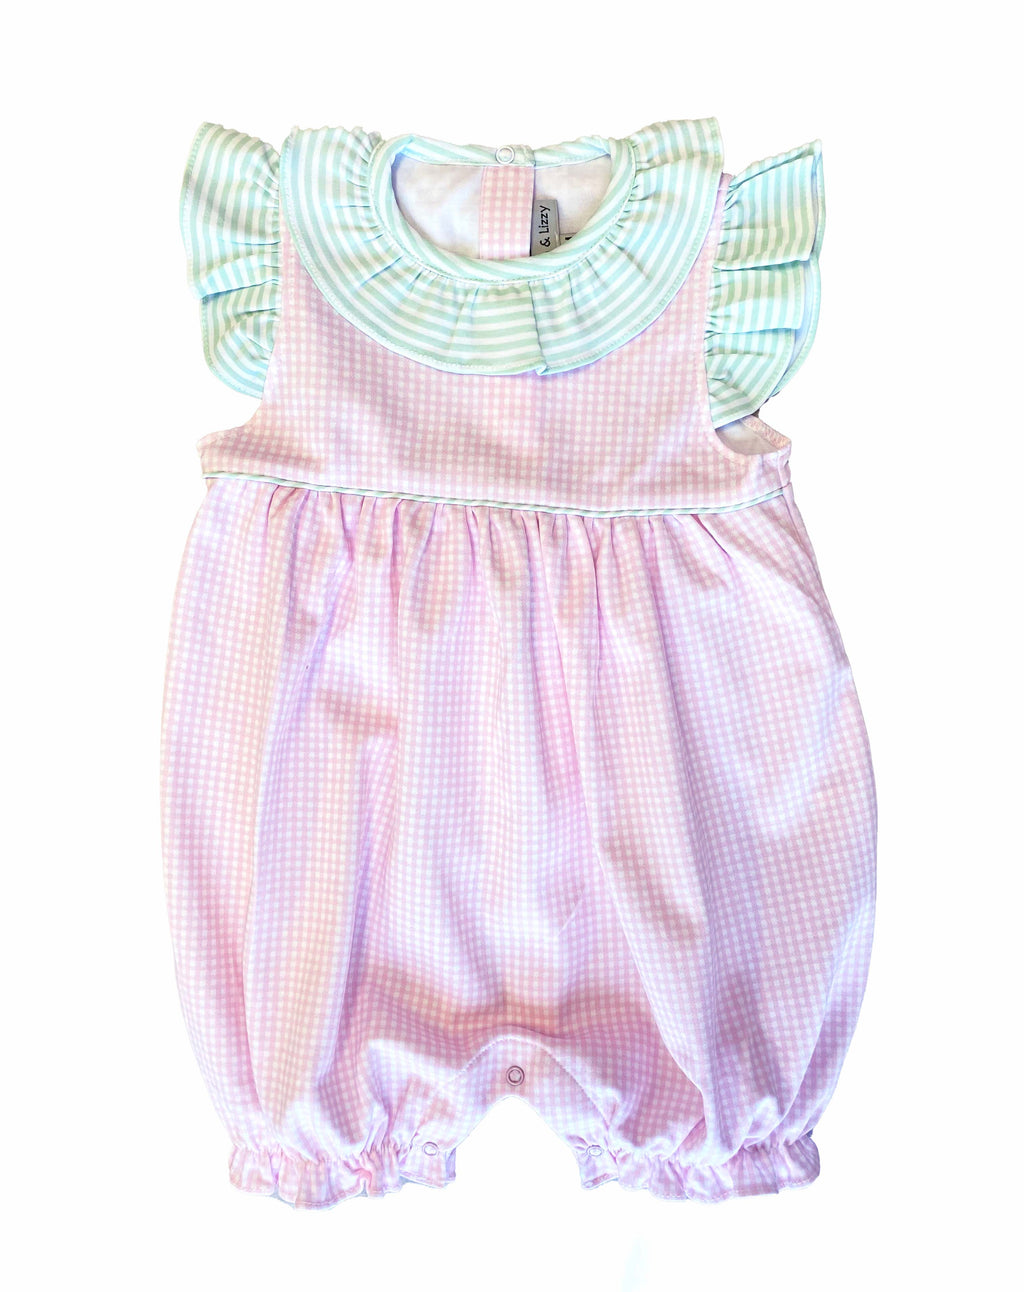 Baby Girl's "Tea Time" Knit Romper(NO Embroidery) - Little Threads Inc. Children's Clothing